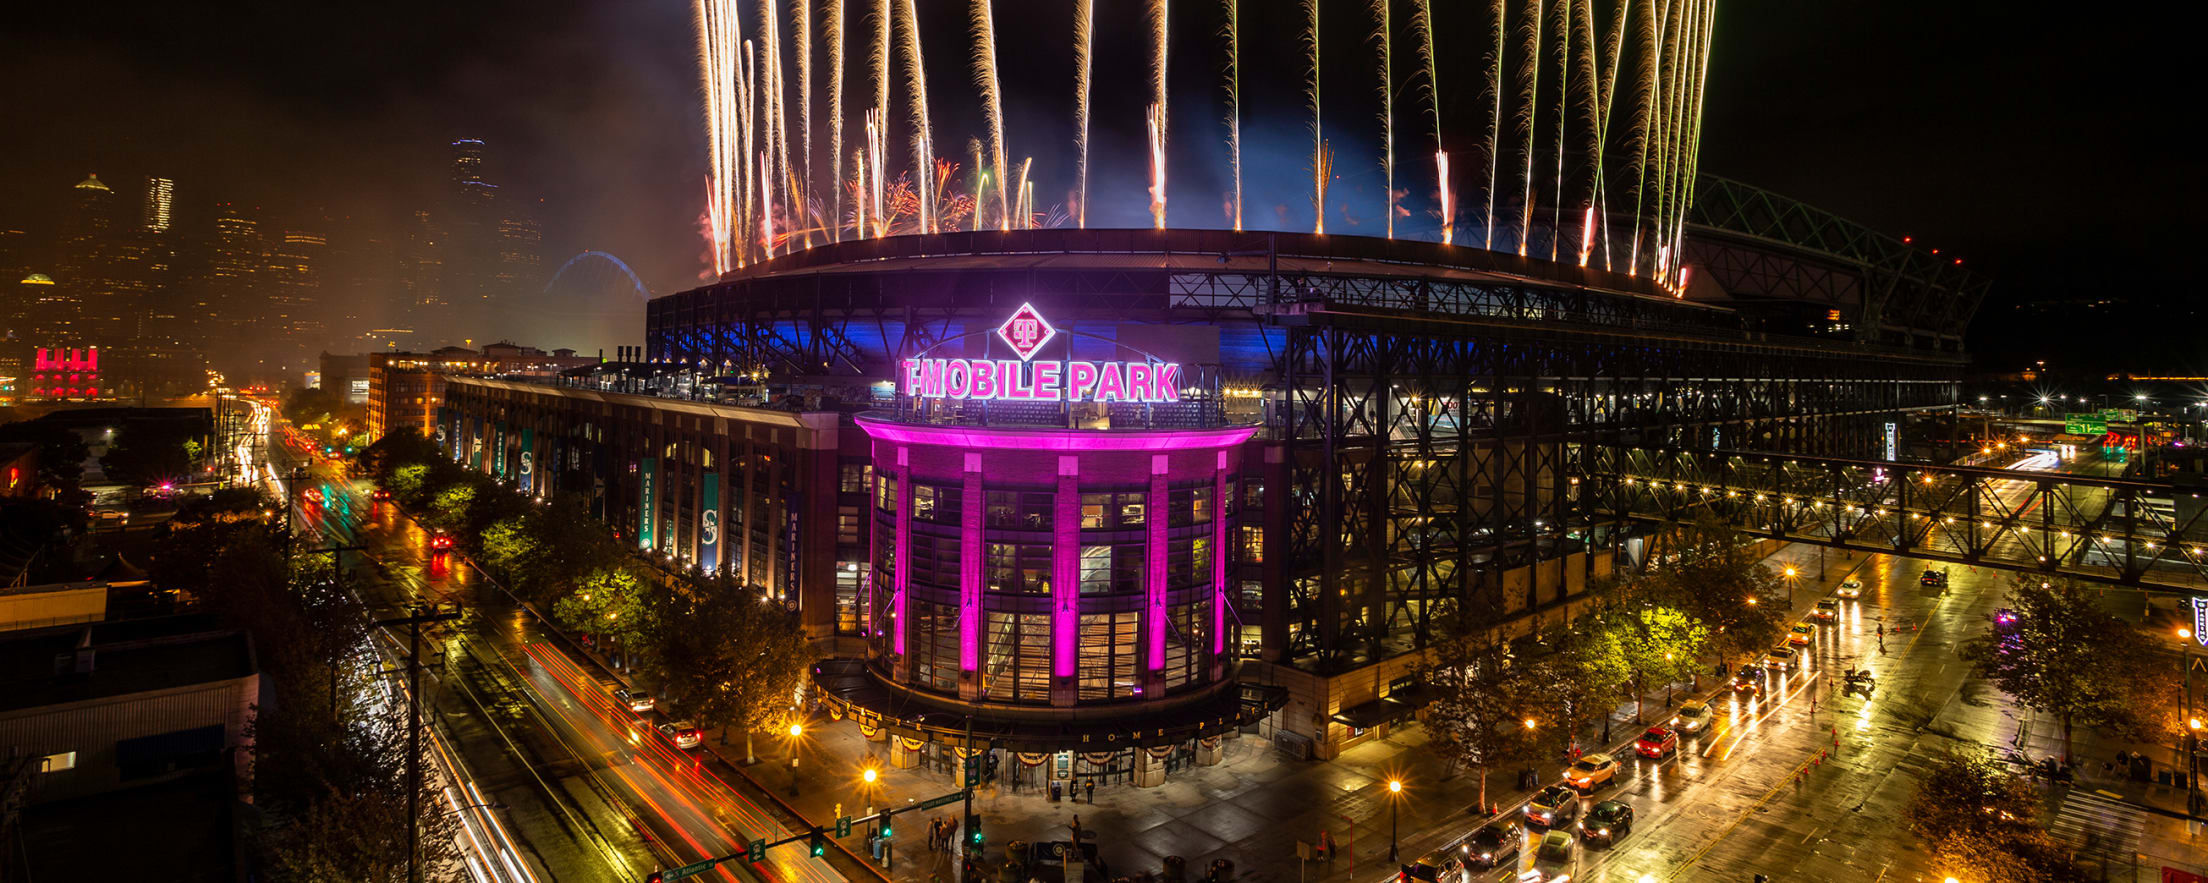 Kingdome - history, photos and more of the Seattle Mariners former  ballparkKINGDOME 